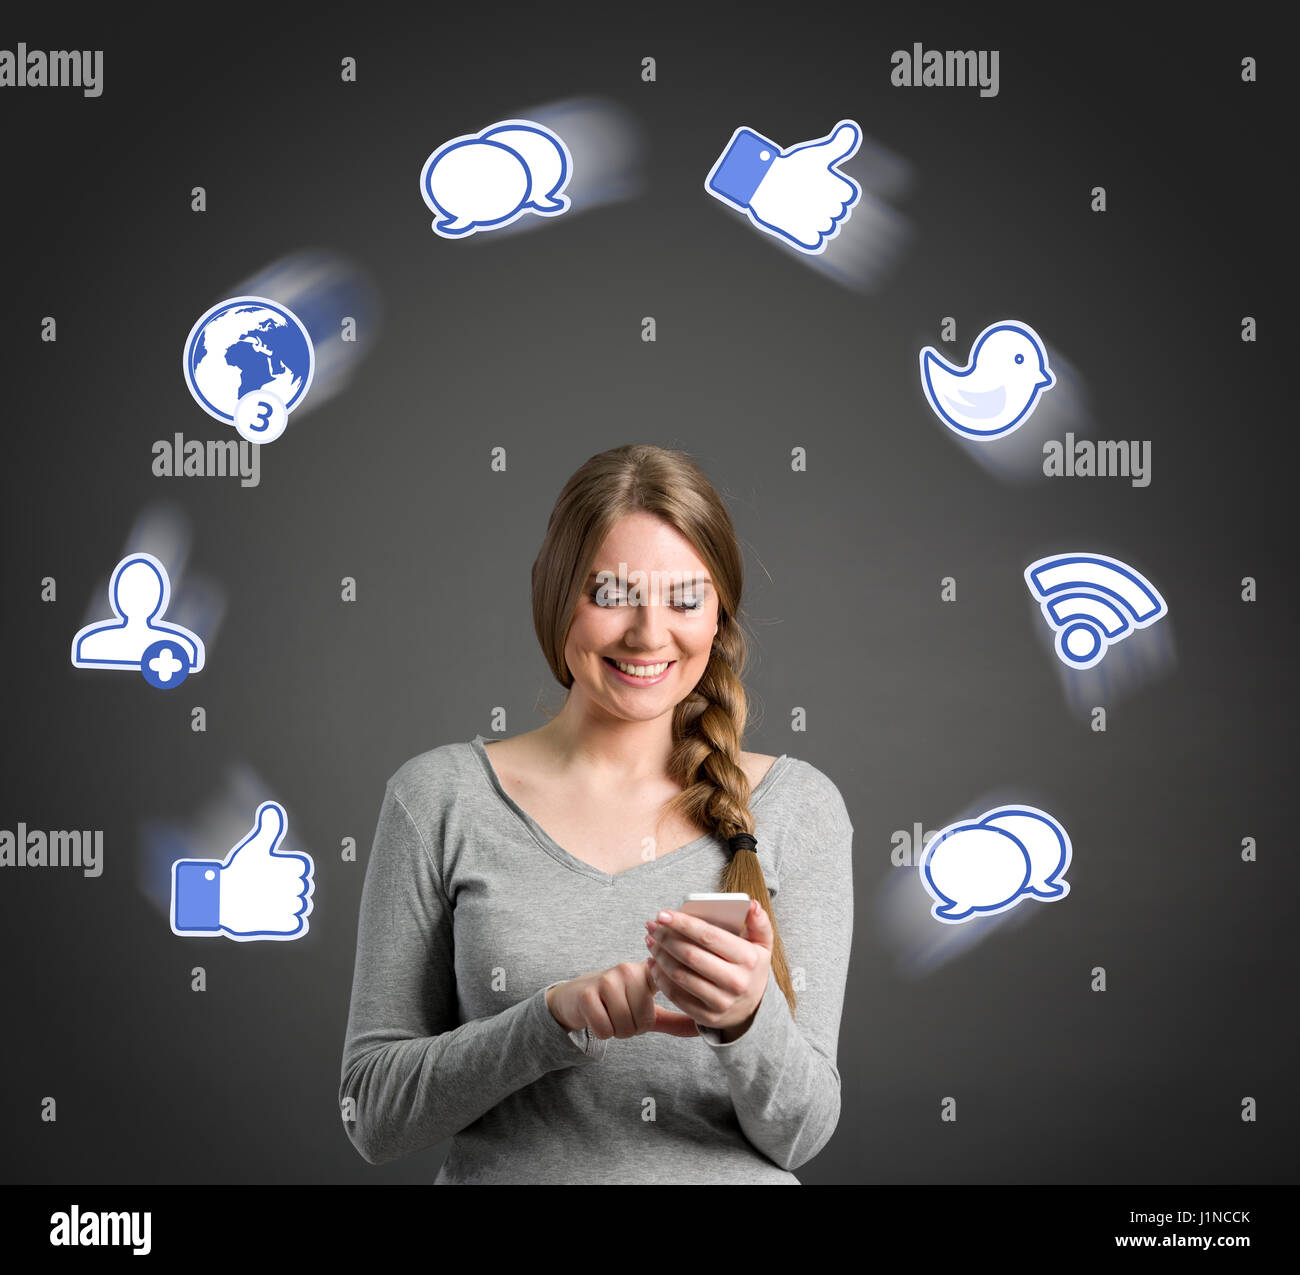 Smiling young woman using smart phone with illustrated media social icons around her Stock Photo